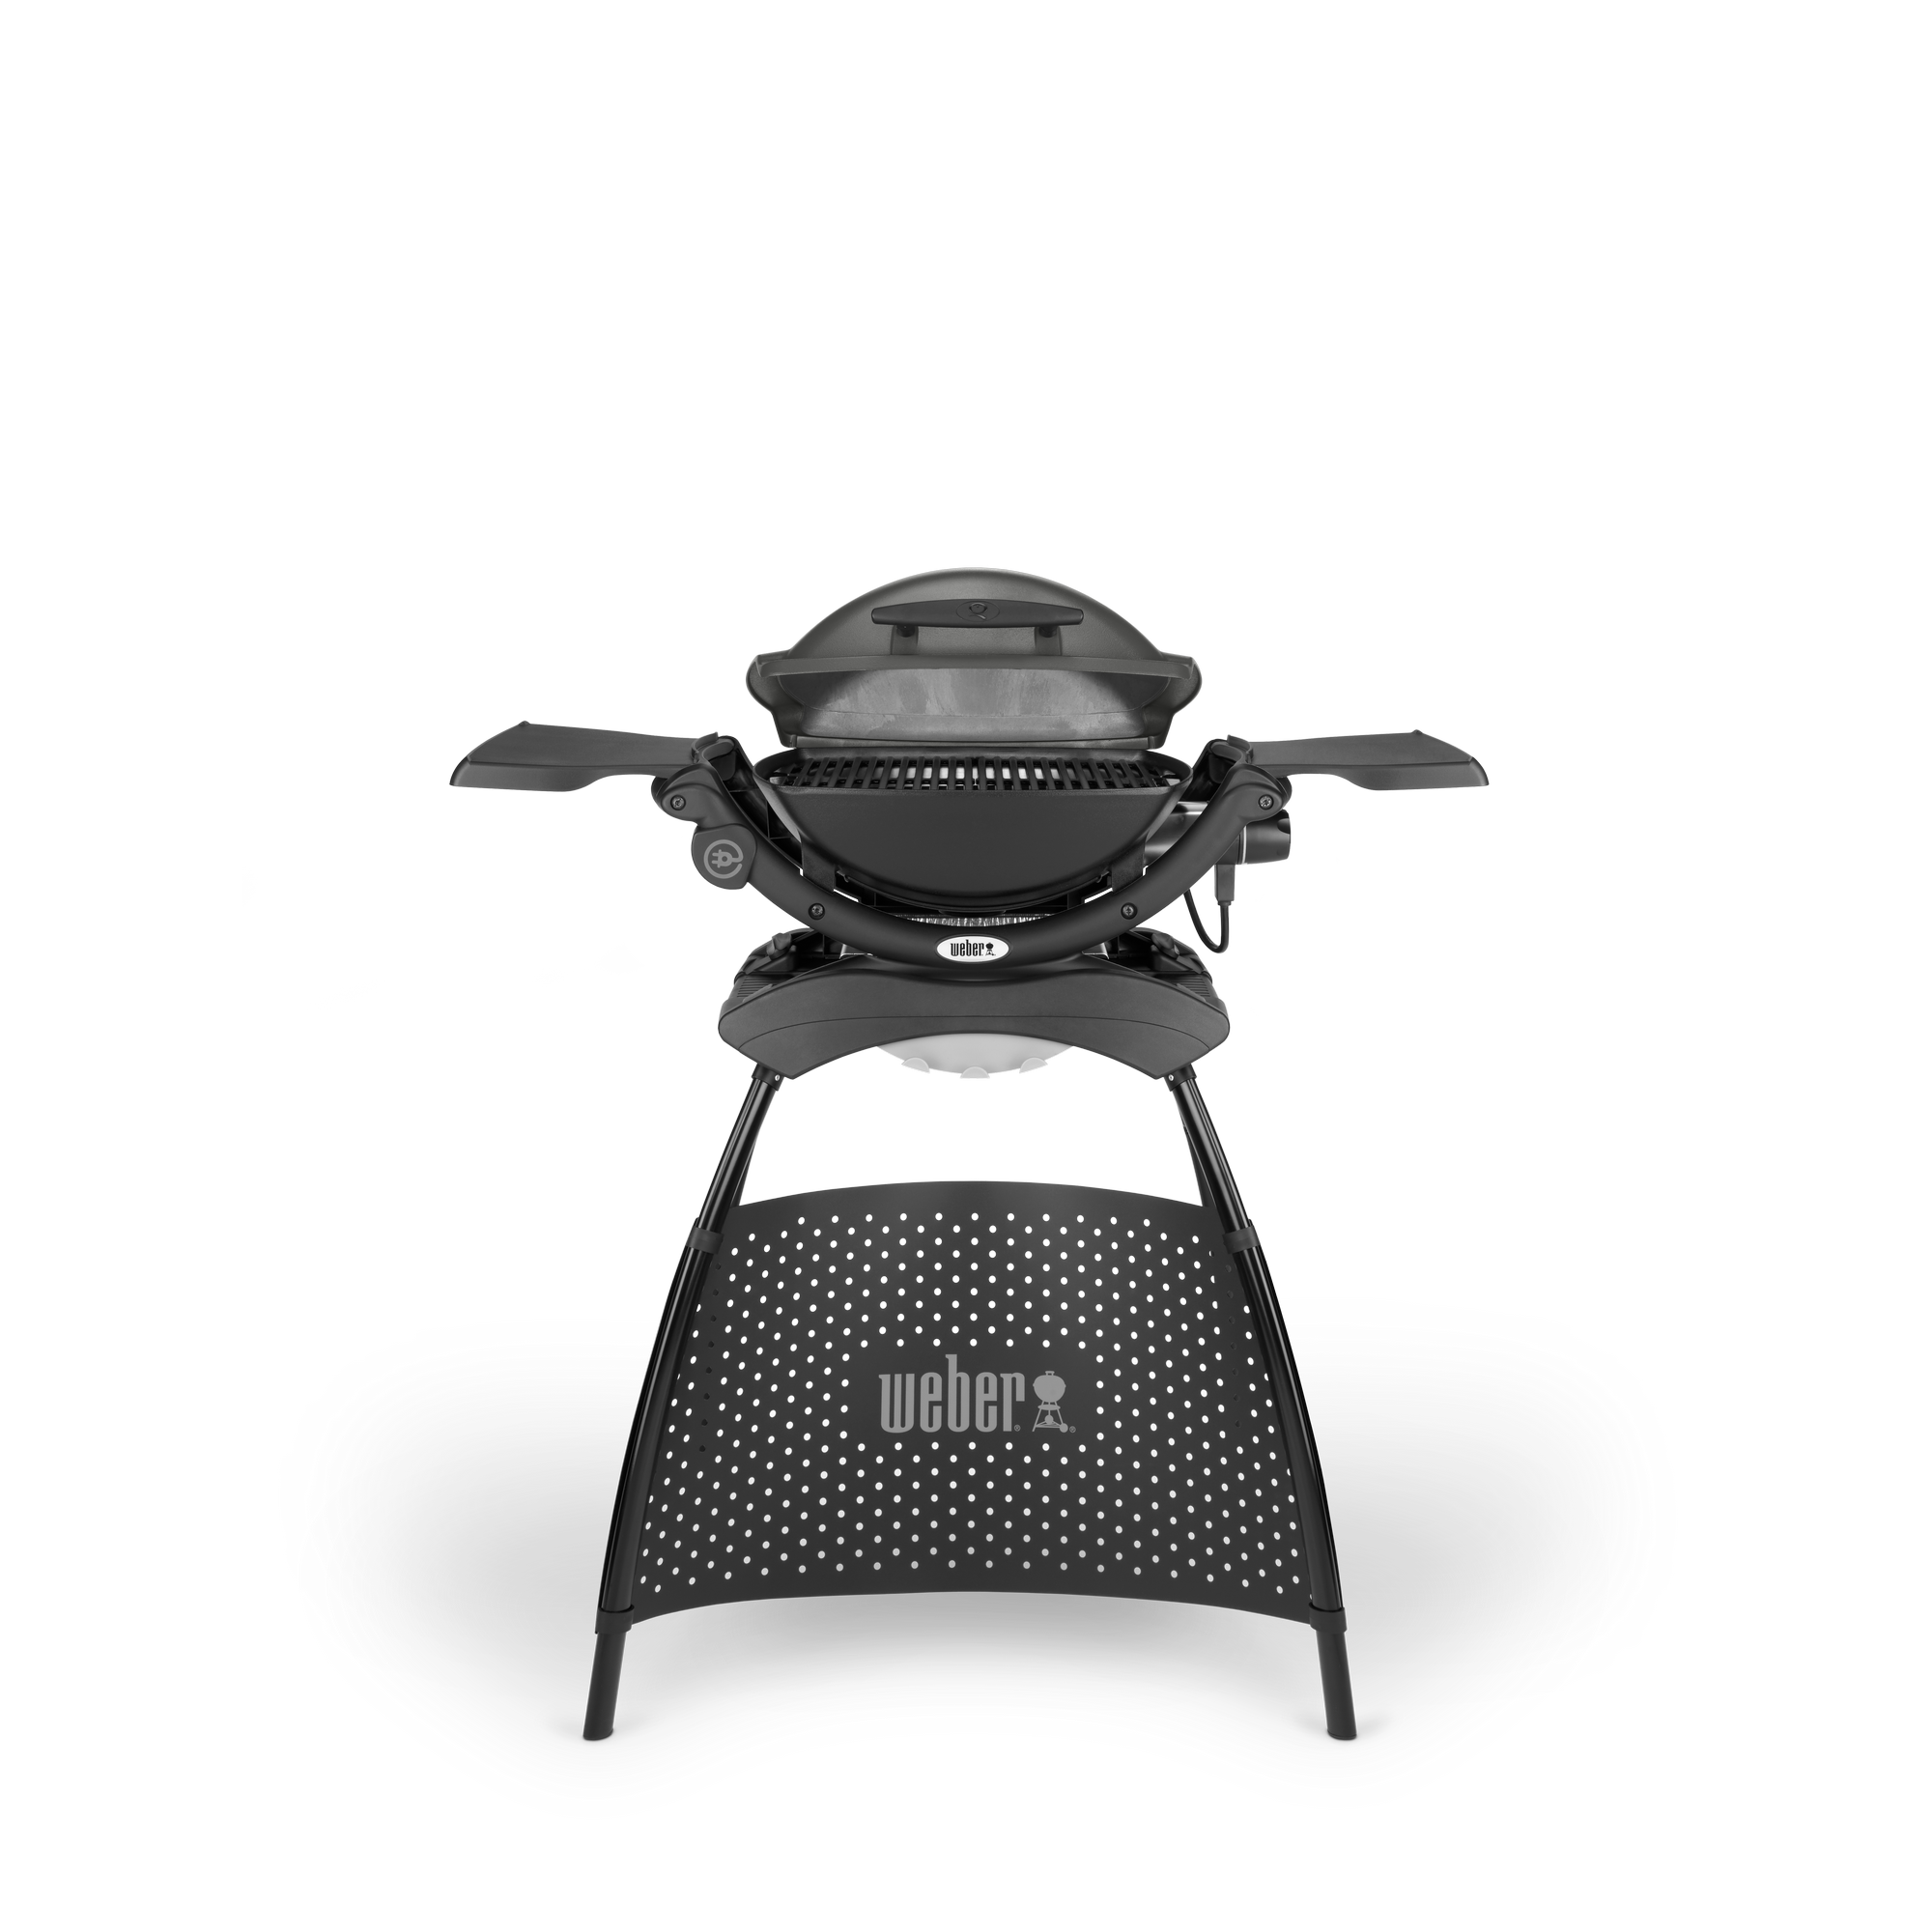 Elektrogrill 'Weber® Q 1400' mit Stand dunkelgrau + product picture